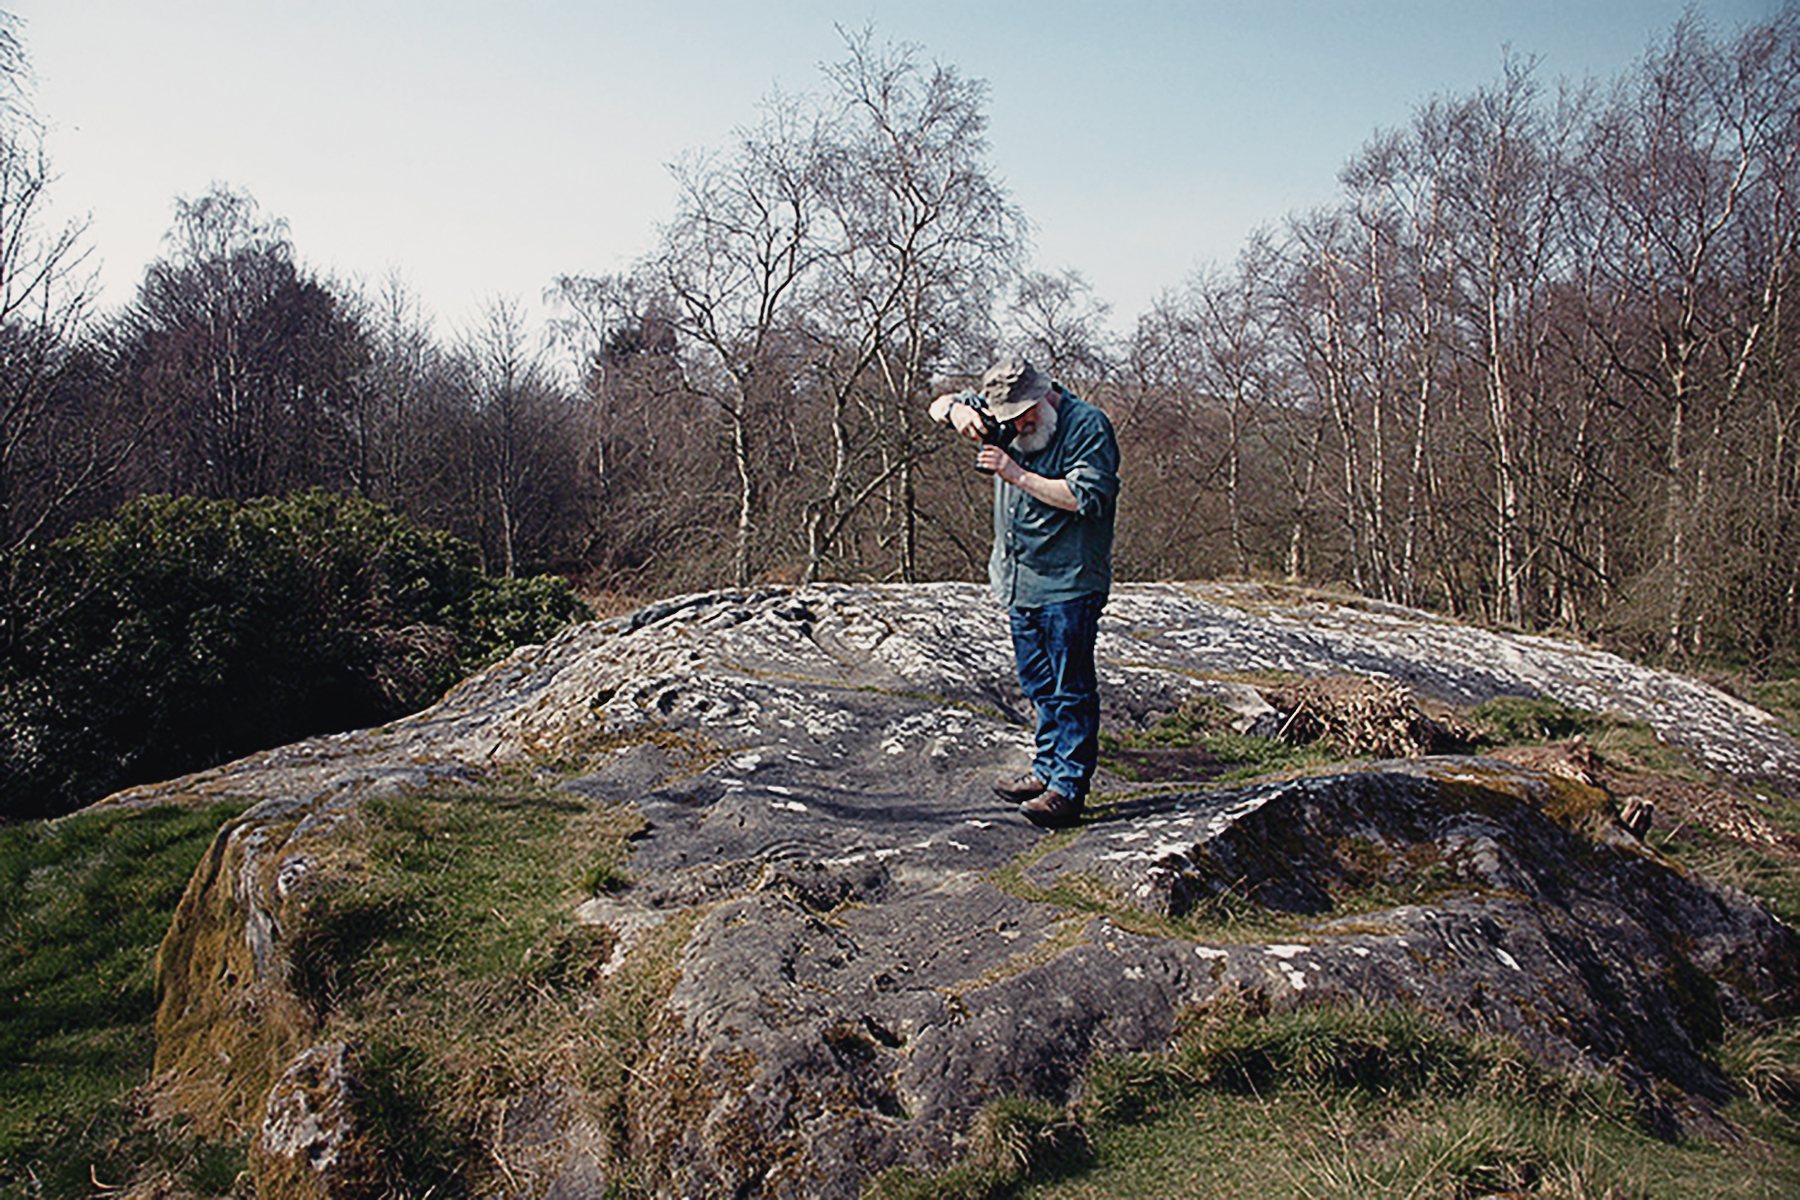 Dr Aron Mazel recording the rock art carvings of Northumberland, England